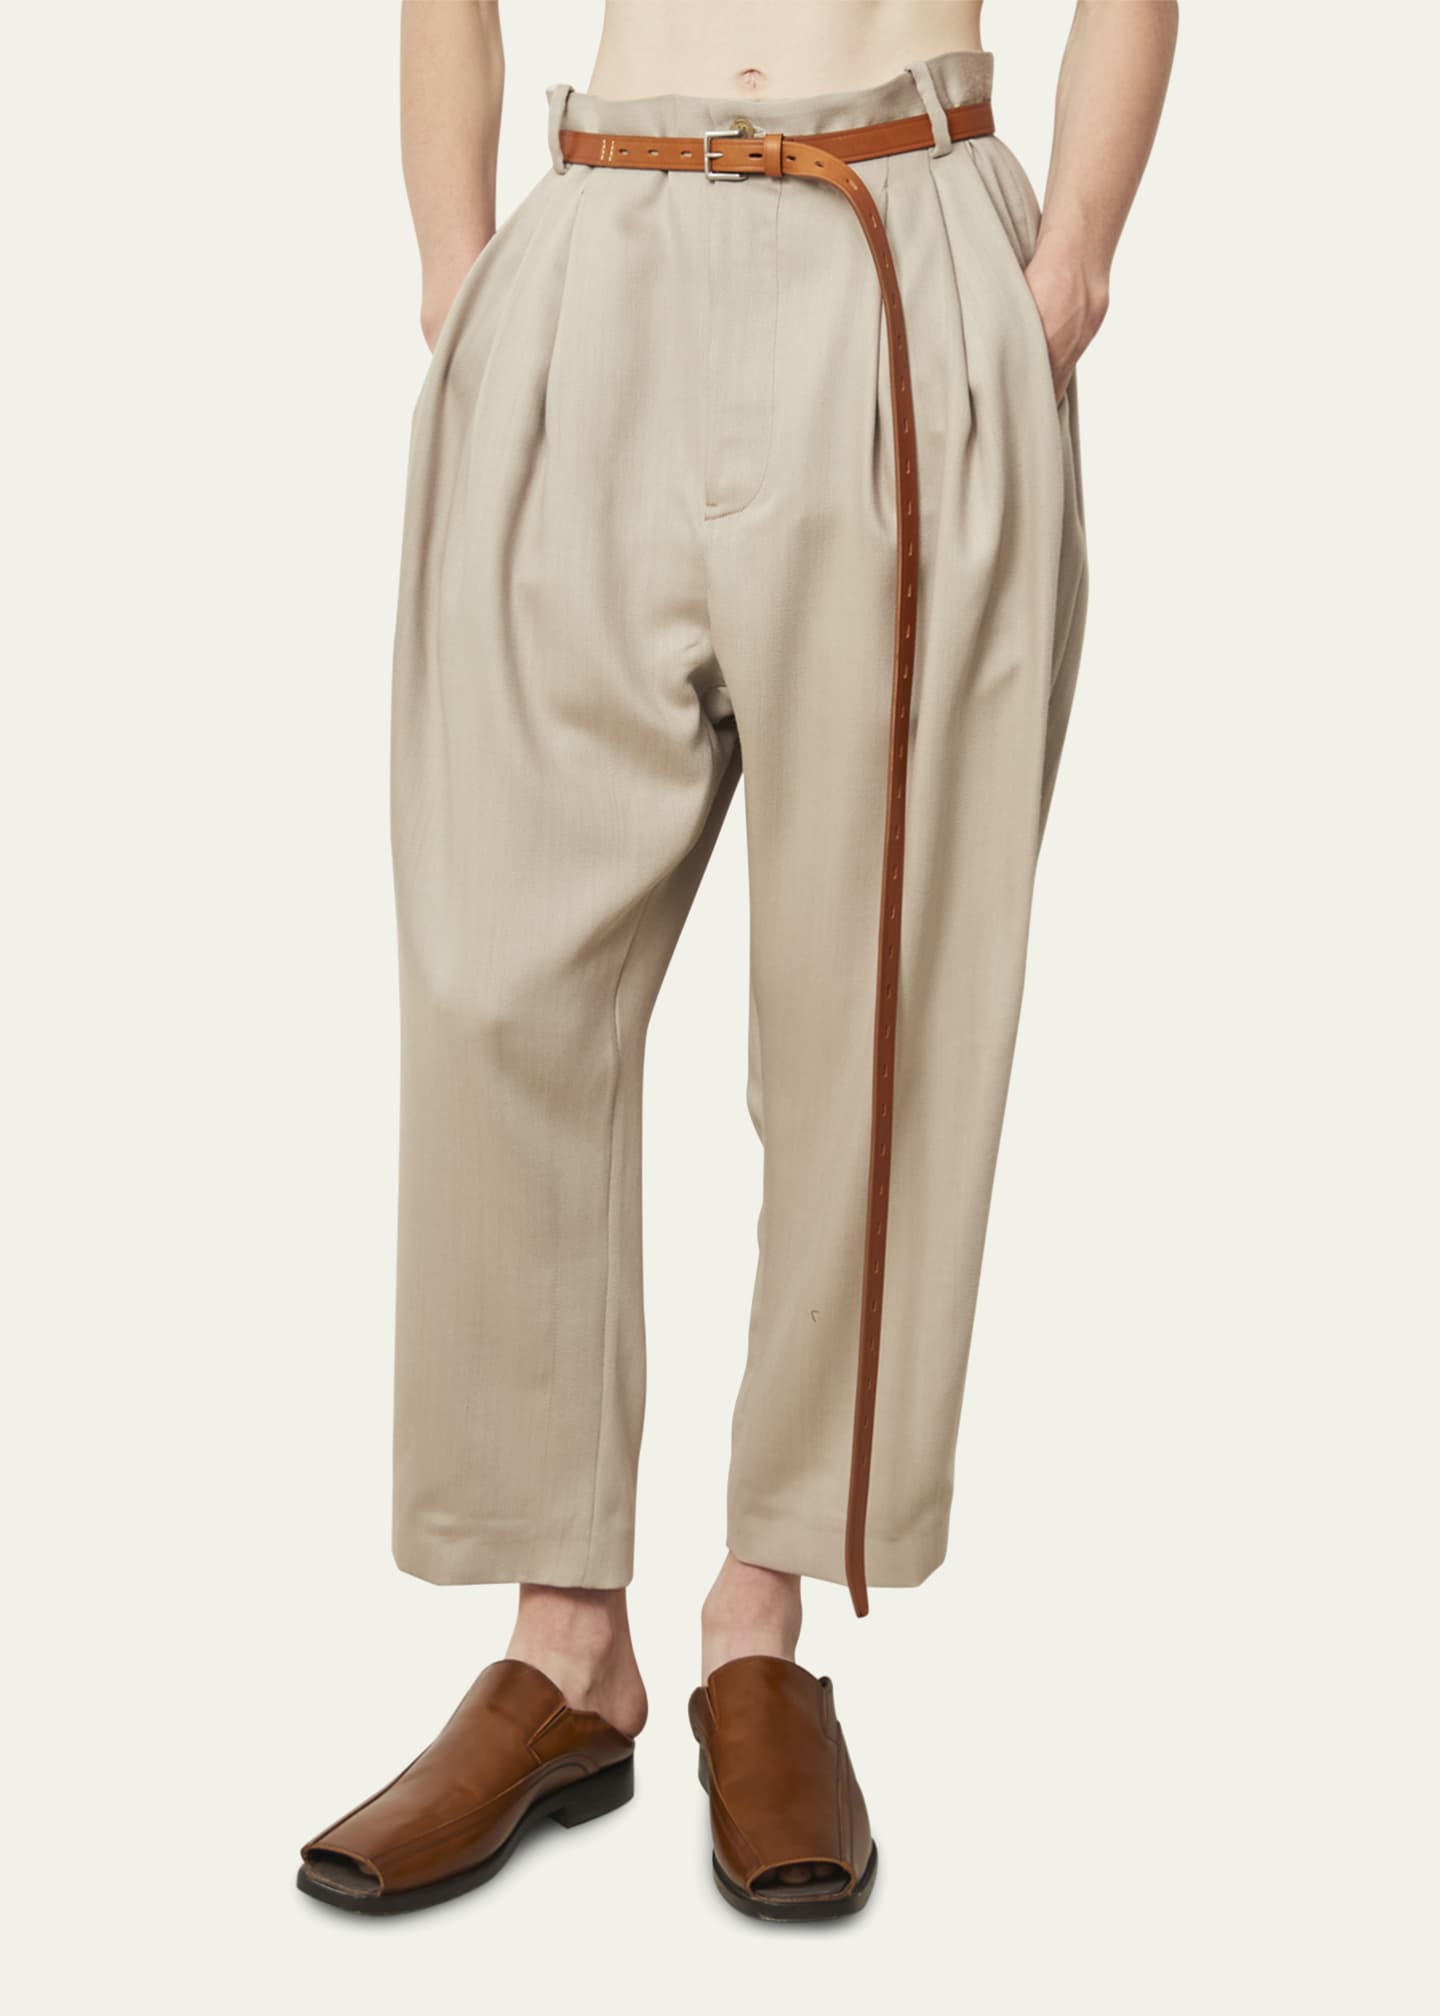 22AW】HED MAYNER / 6 Pleat Pants - パンツ